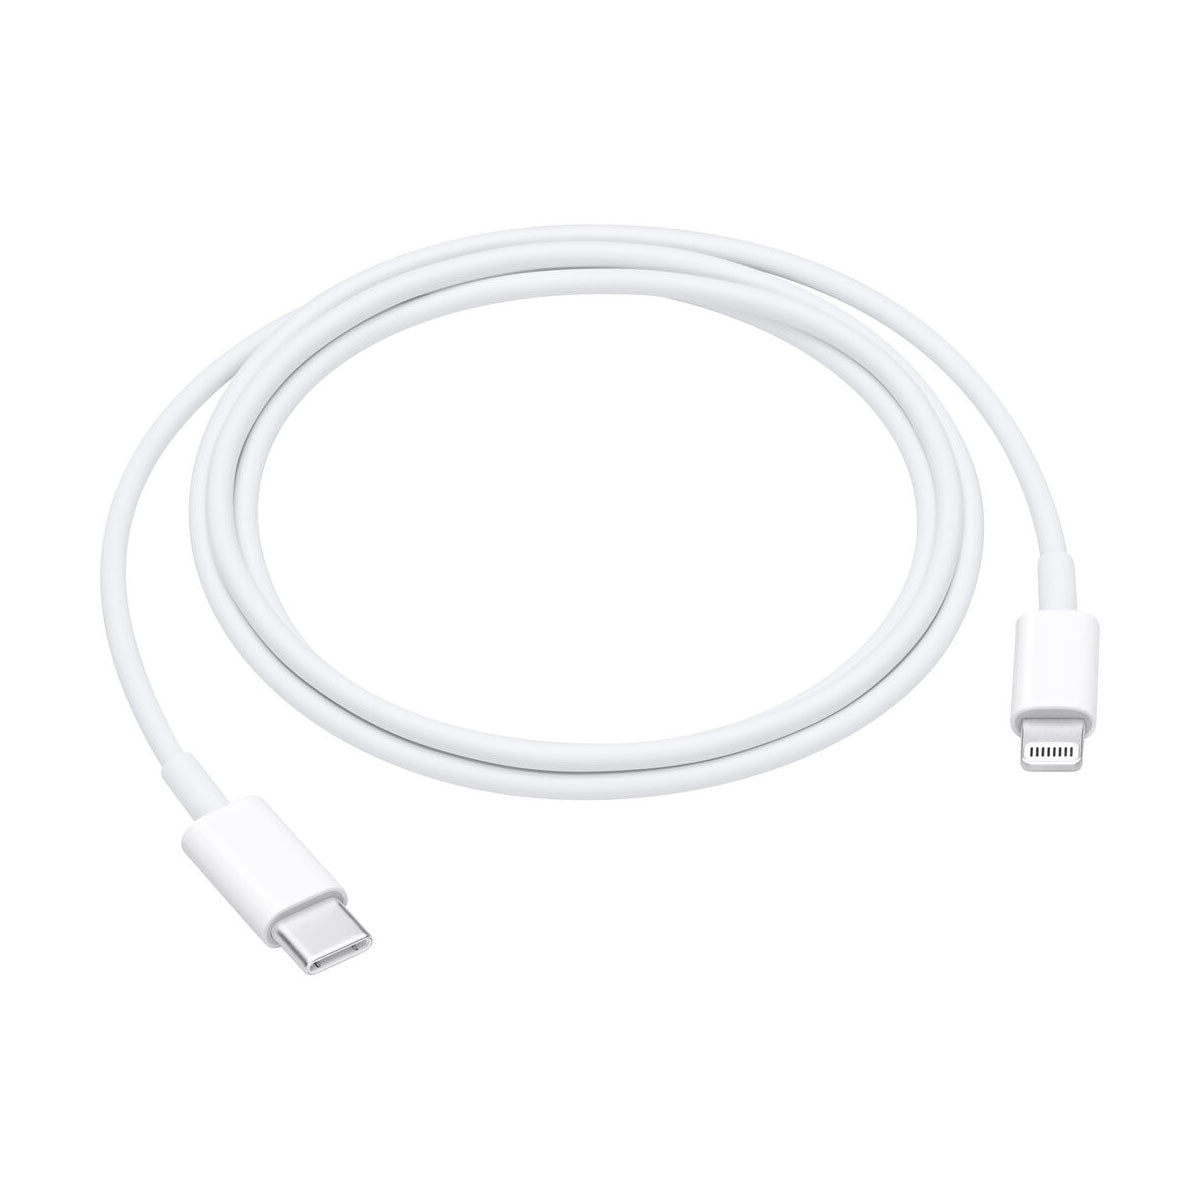 ♥ New, Factory Sealed - Apple USB Type-C to Lightning Cable 1 Meter (3.3') MM0A3AM/A